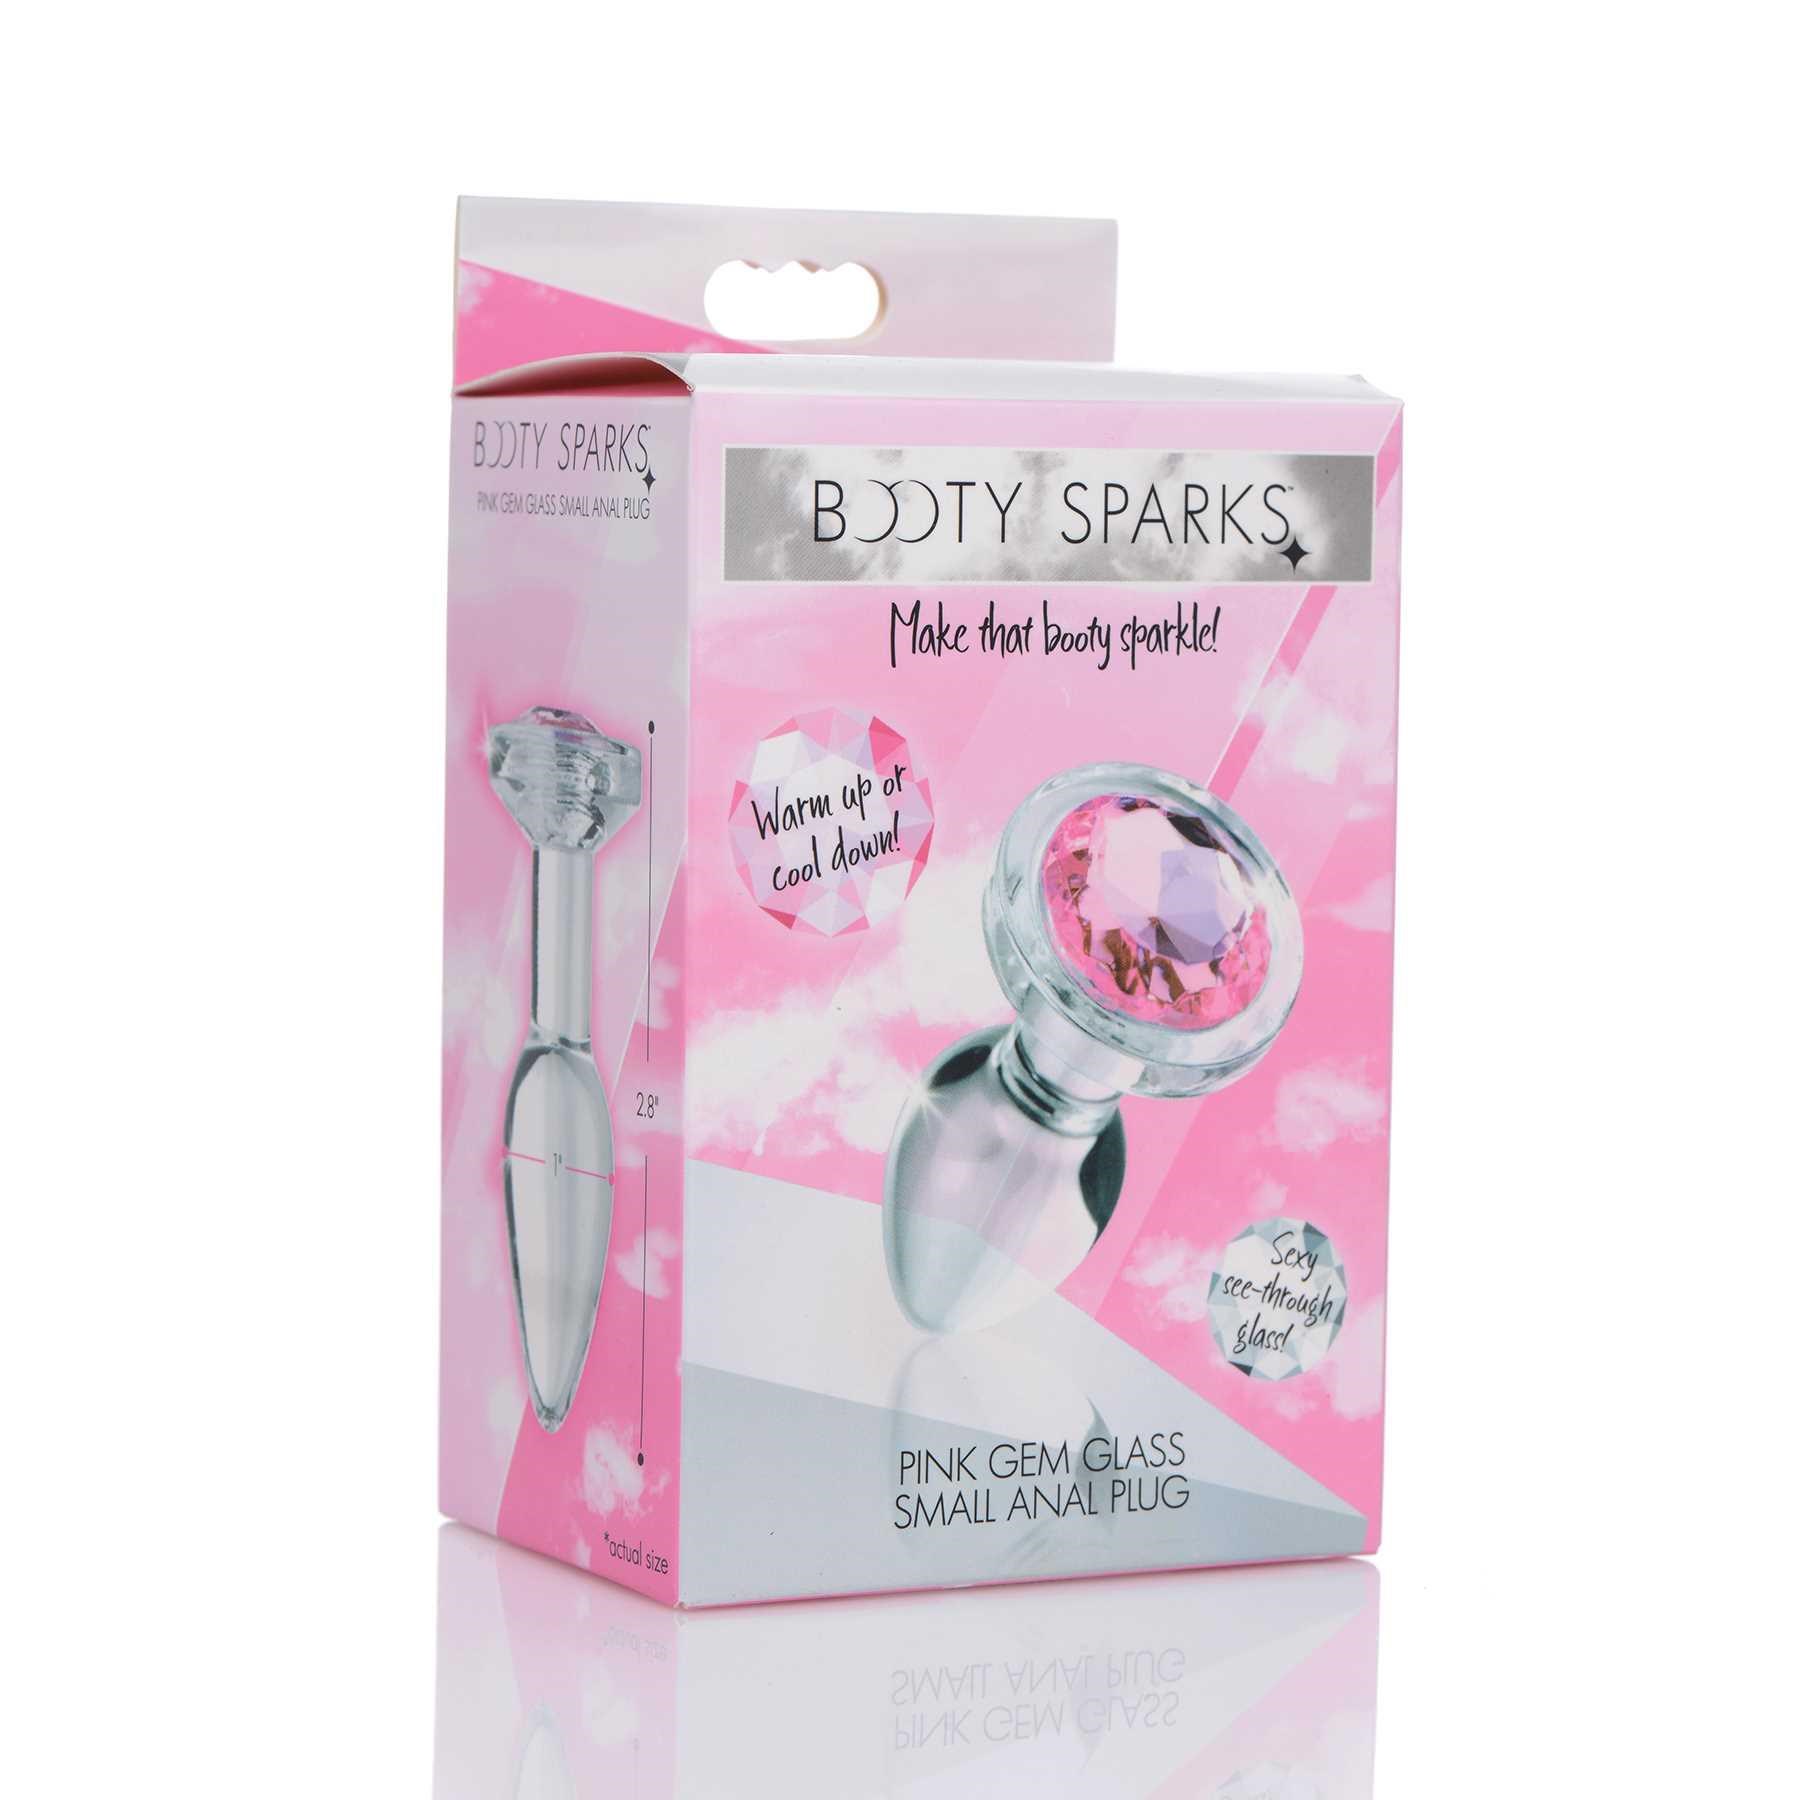 Booty Sparks Pink Gem Glass Anal Plug box packaging